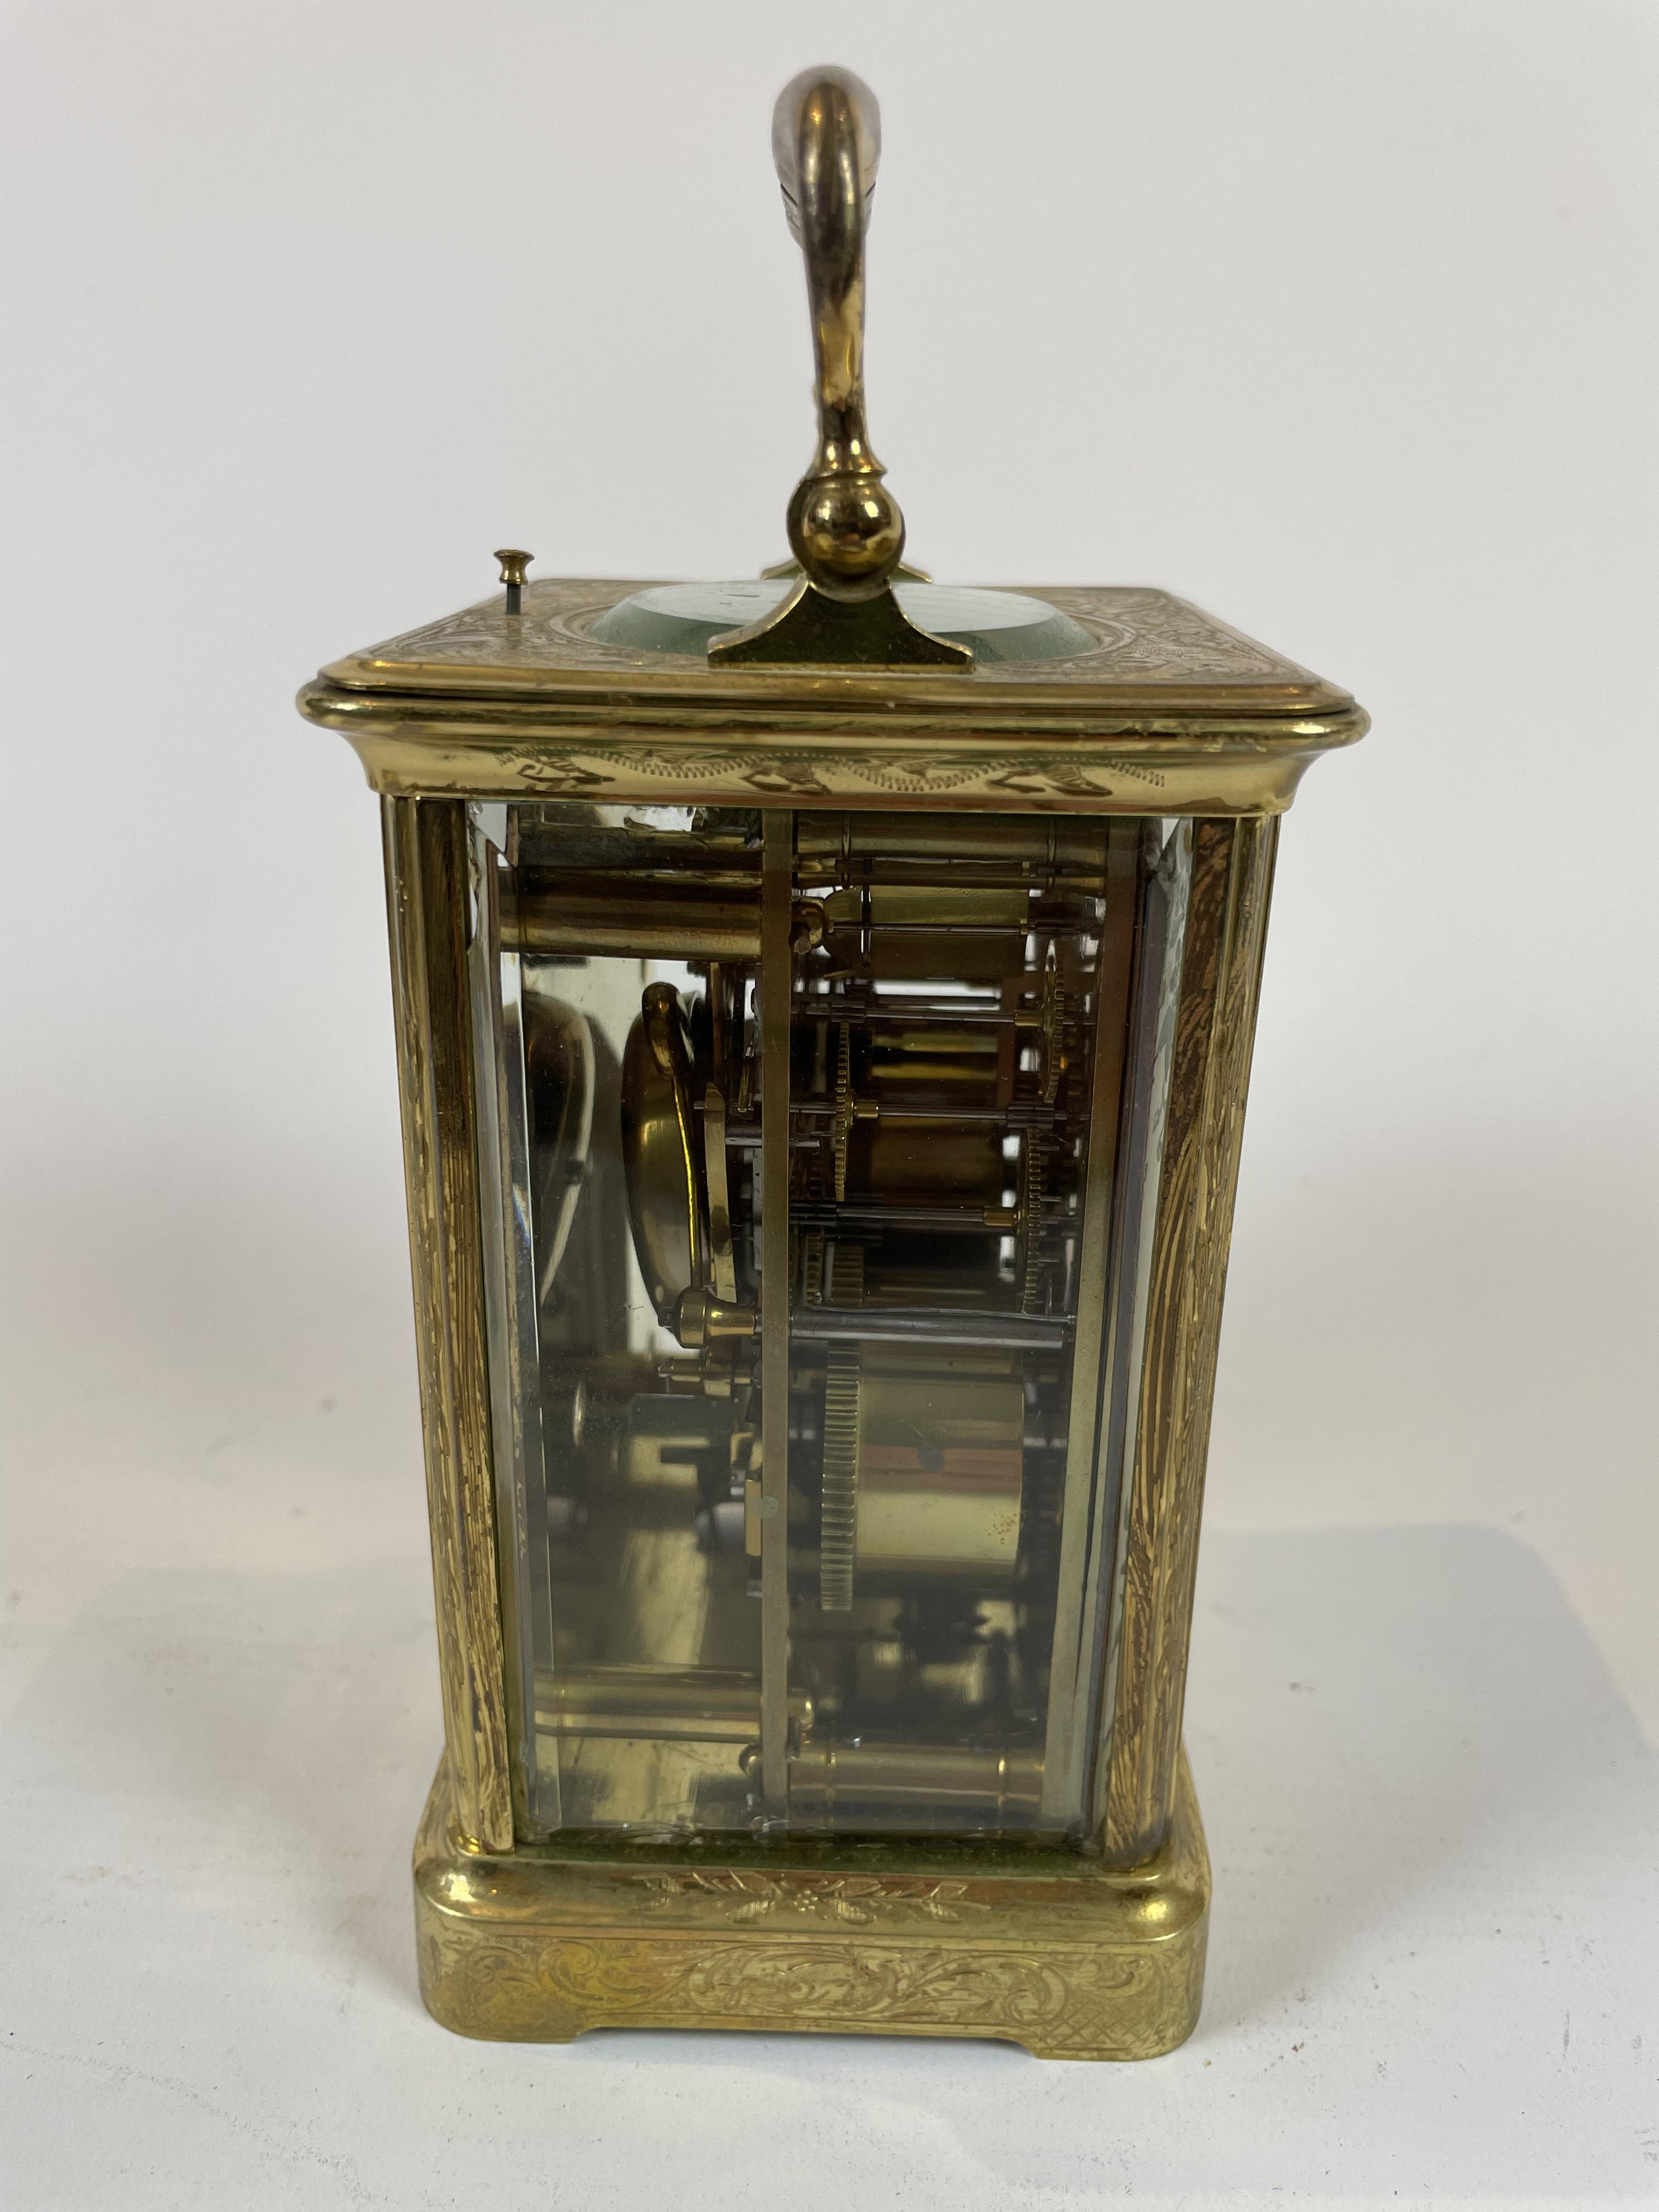 Repeater Carriage Clock with floral design - Image 2 of 2